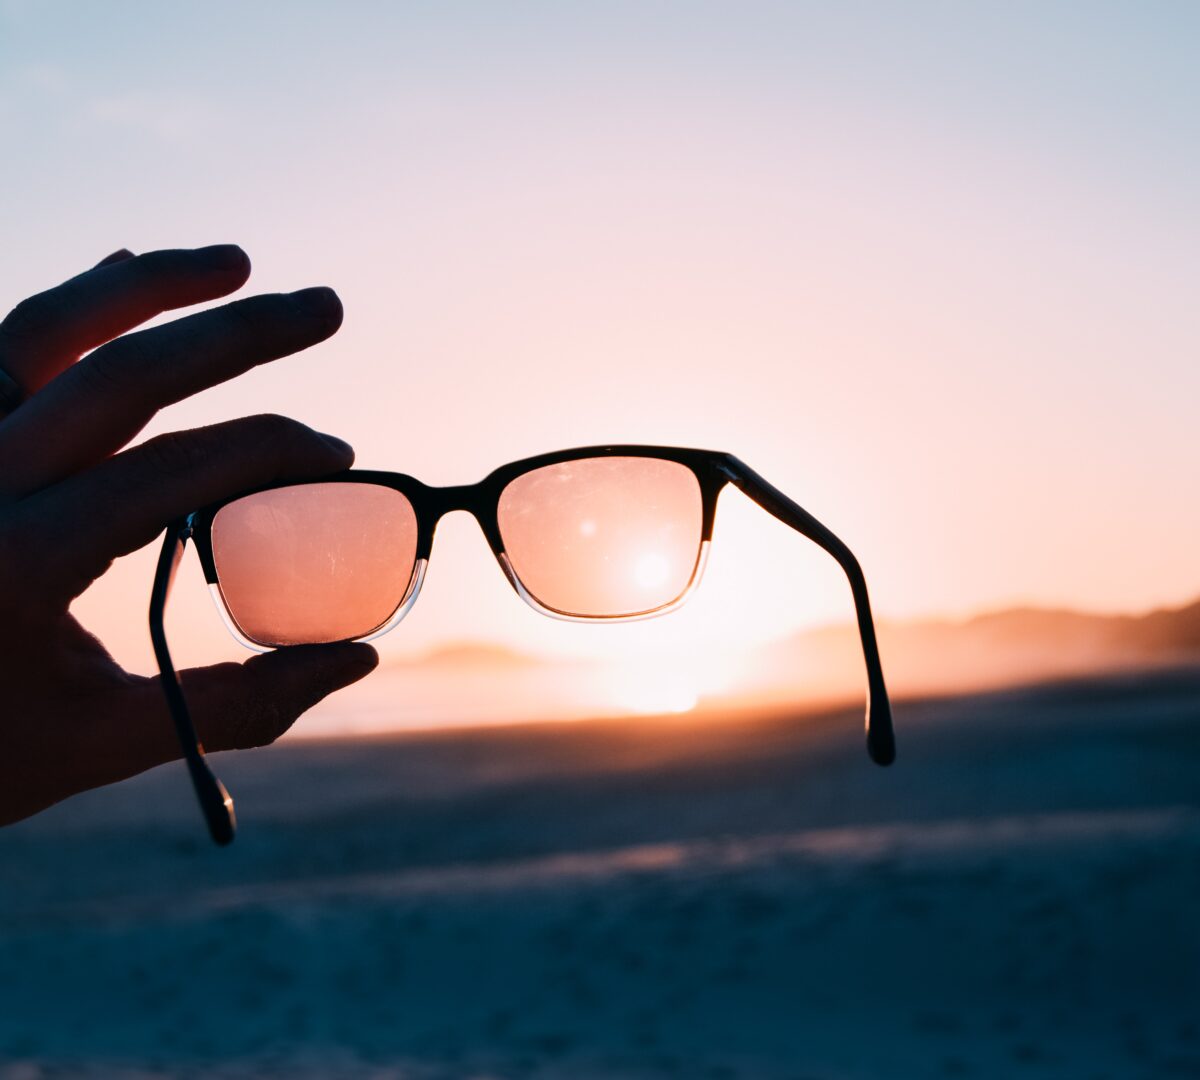 What does polarized sunglasses mean?